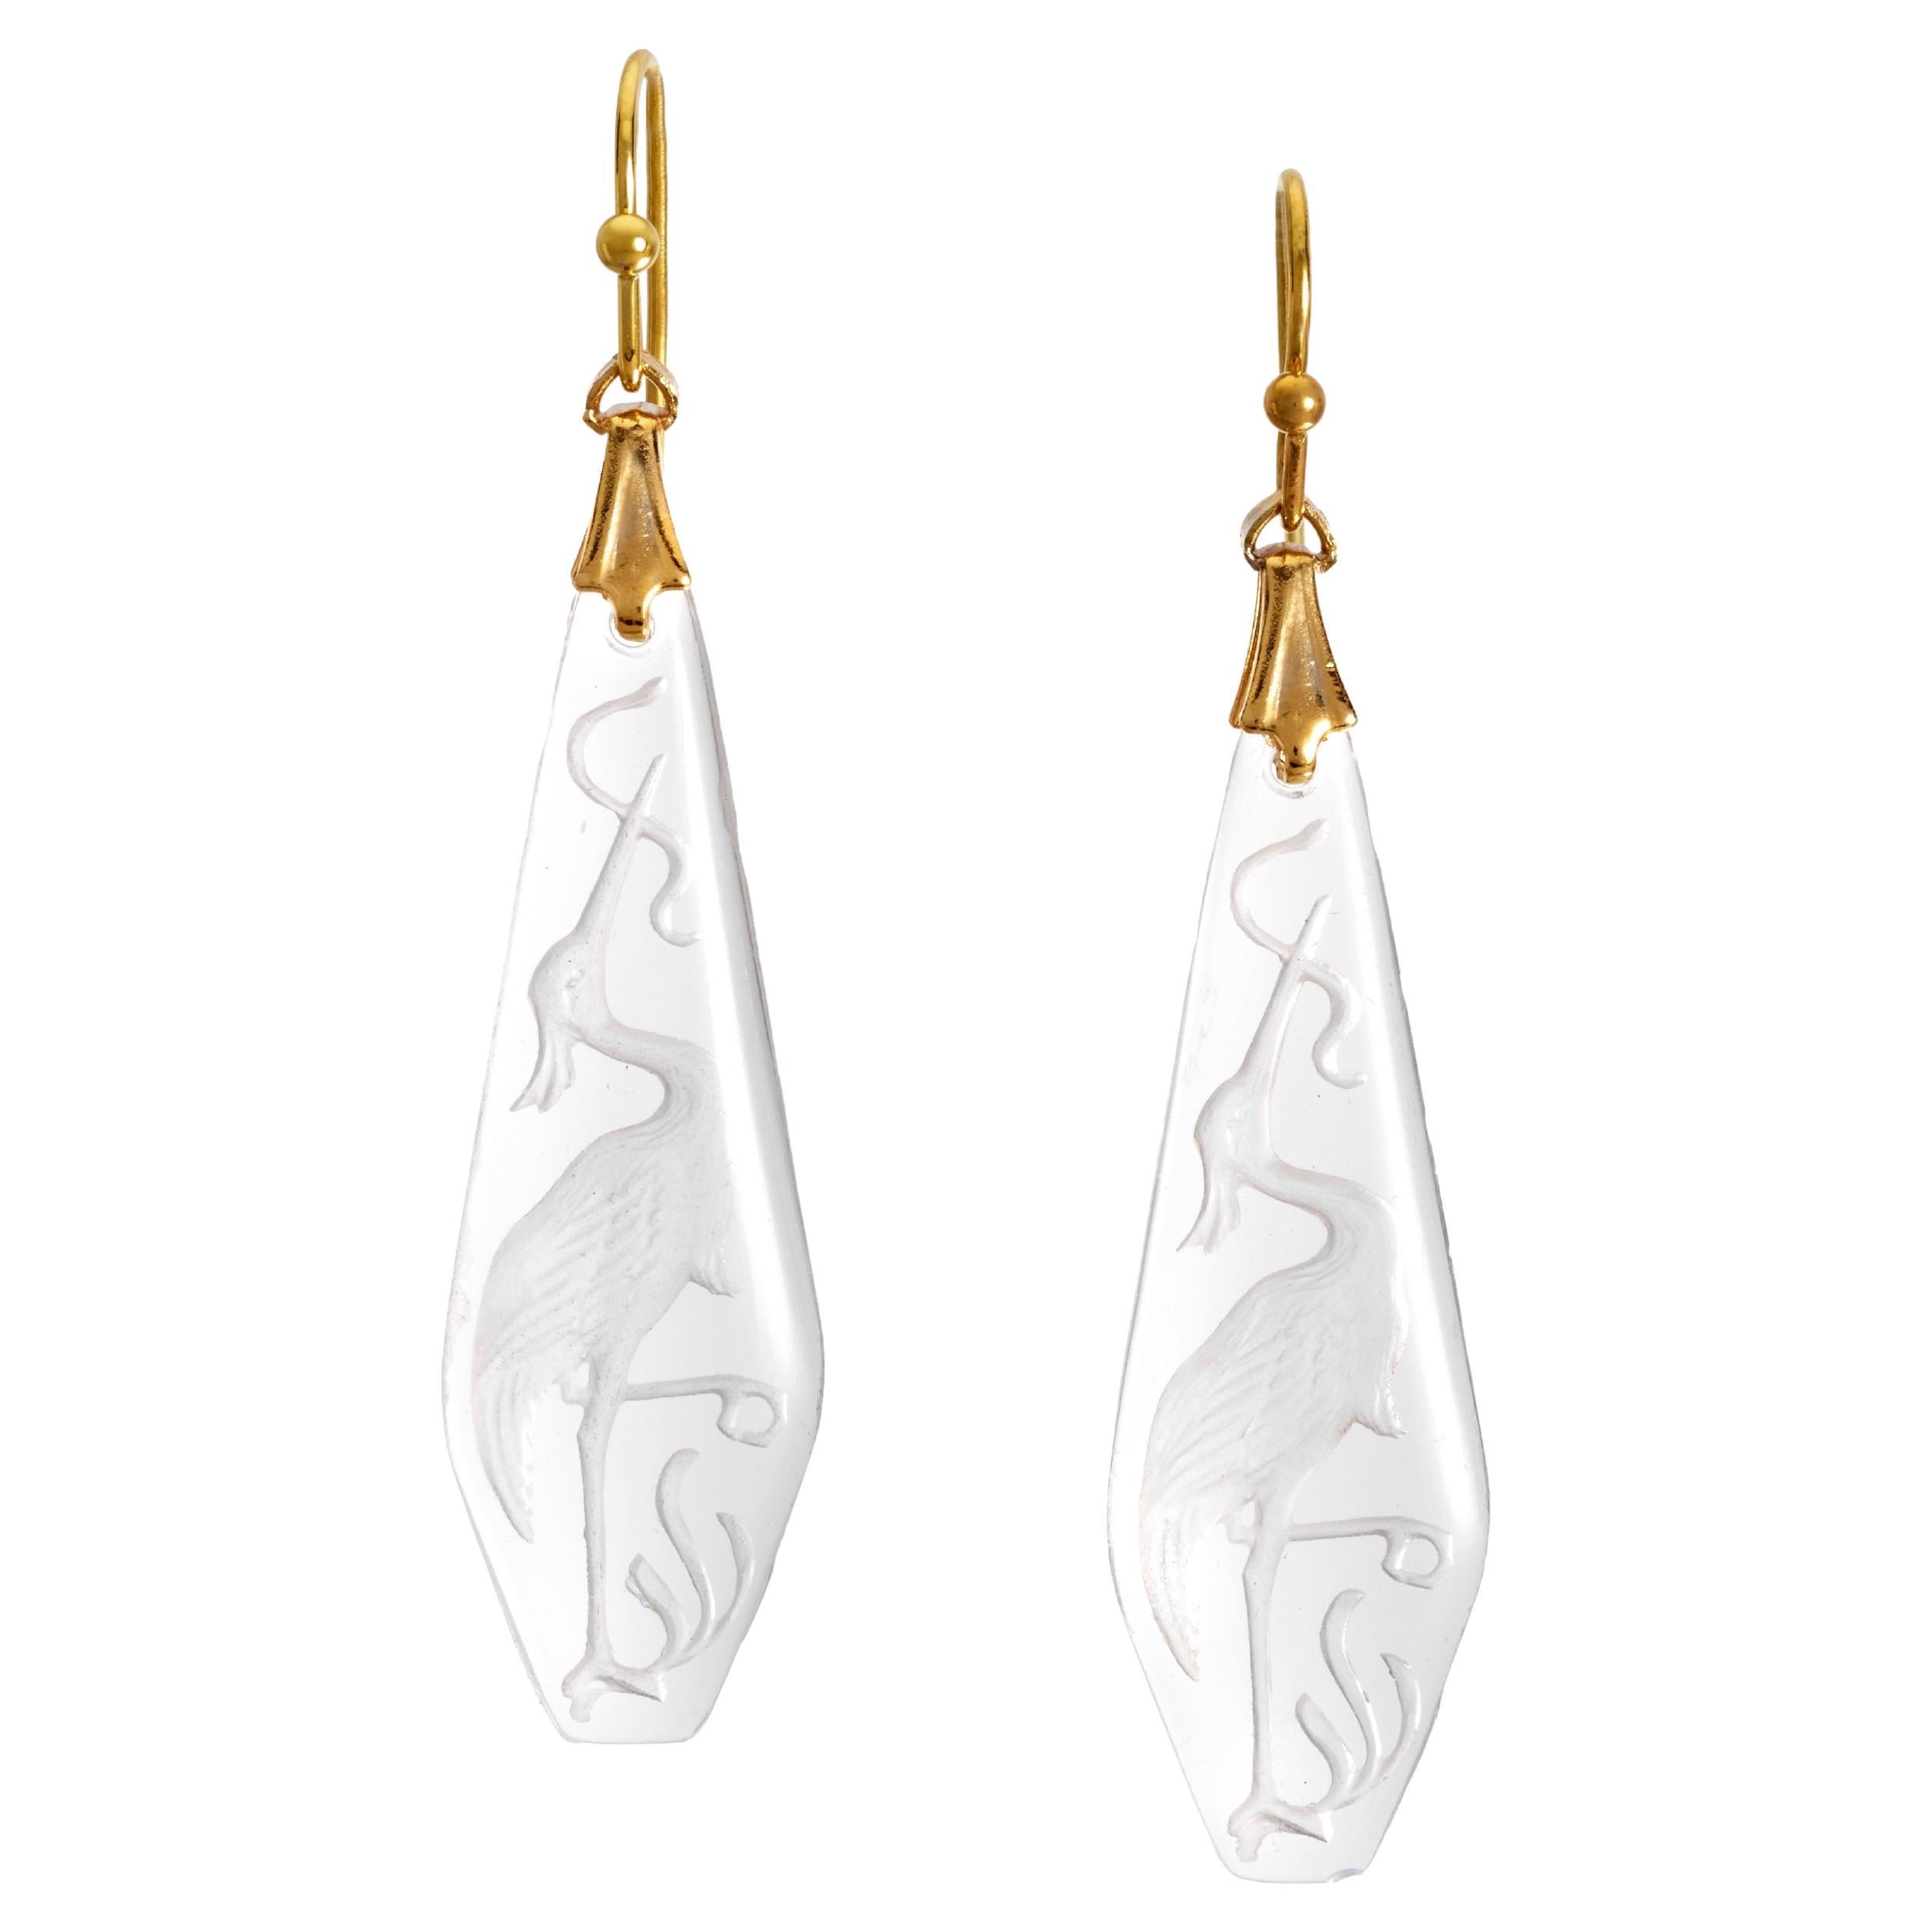 PONTIEL Art Deco Etched Heron Motif in Clear Glass with Gold Fill Earrings For Sale